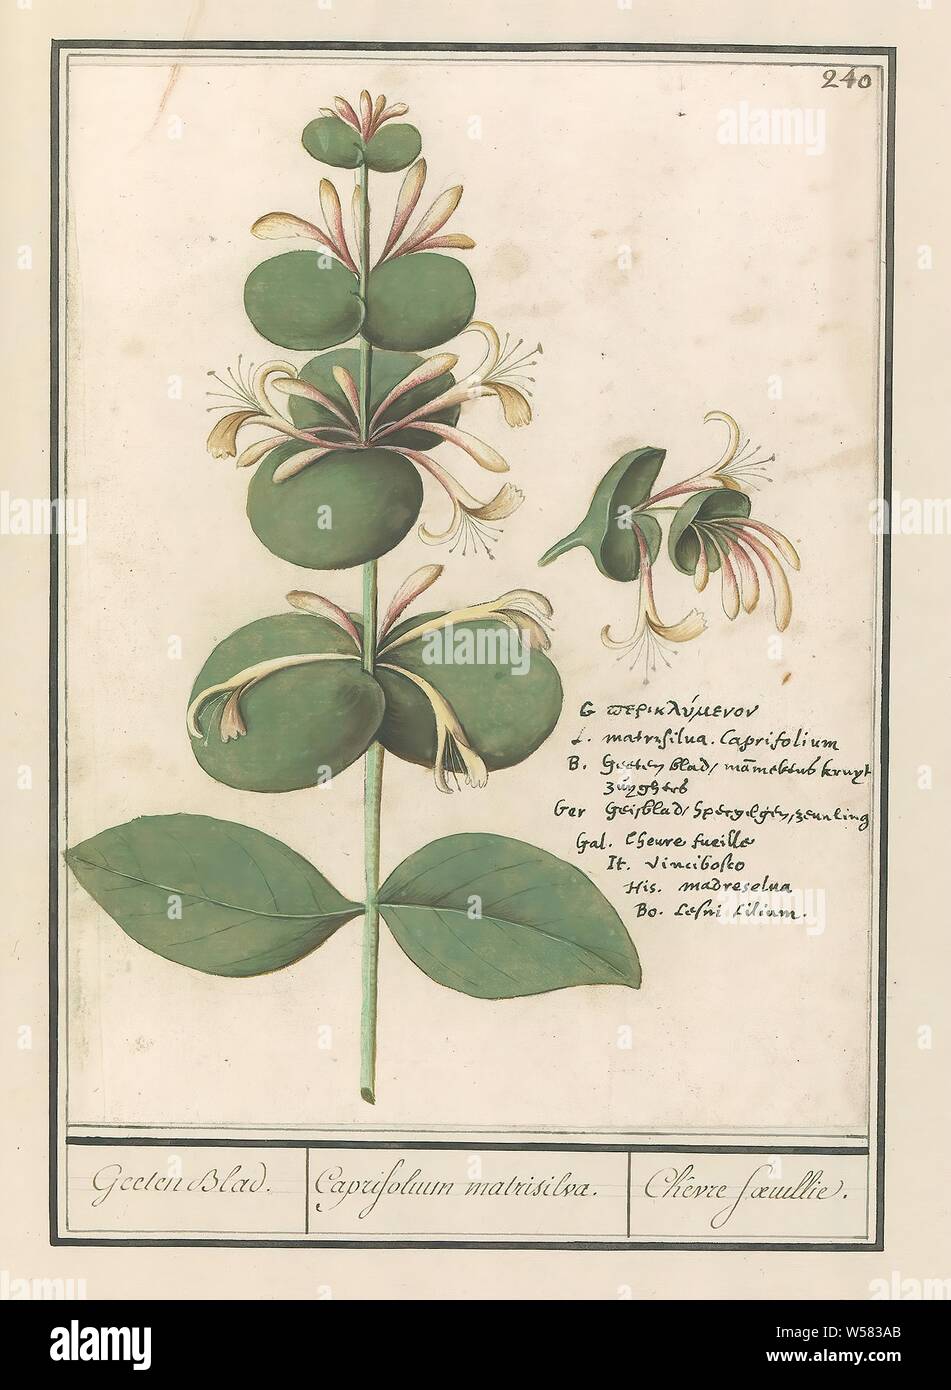 Regular honeysuckle (Lonicera caprifolium) Geelen Blad. / Caprifolium matrisilva. / Chêvre foeuillie. (title on object), Garden honeysuckle or regular honeysuckle. Numbered top right: 240. Right the name in eight languages. Part of the third album with drawings of flowers and plants. Tenth of twelve albums with drawings of animals, birds and plants known around 1600, commissioned by Emperor Rudolf II. With explanation in Dutch, Latin and French., Flowers (with NAME), Anselmus Boetius de Boodt, 1596 - 1610, paper, watercolor (paint), deck paint, chalk, ink, pen, h 244 mm × w 184 mm Stock Photo